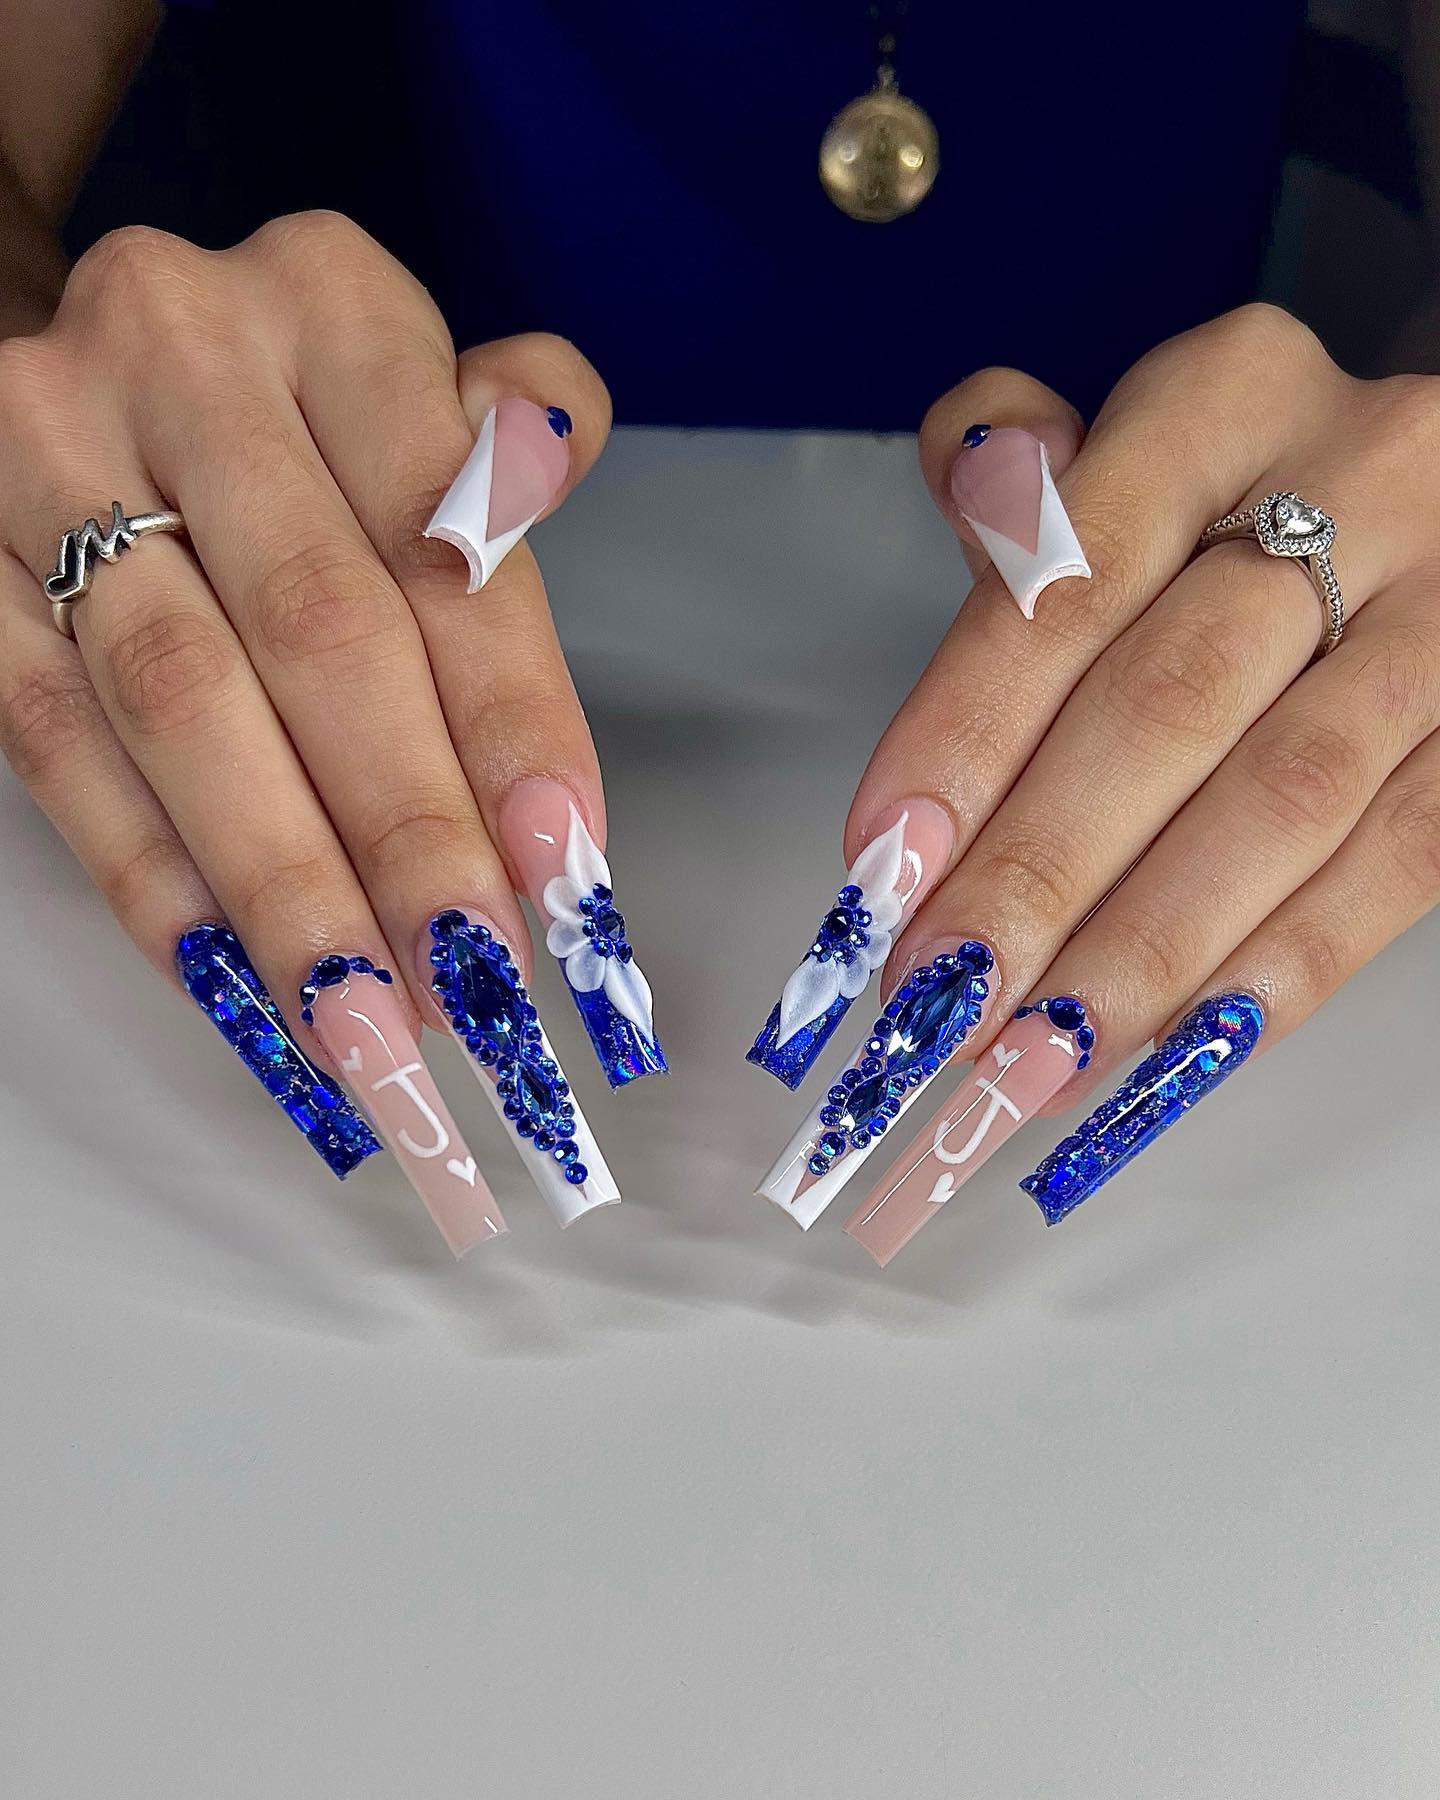 Blue Nails With White Tip